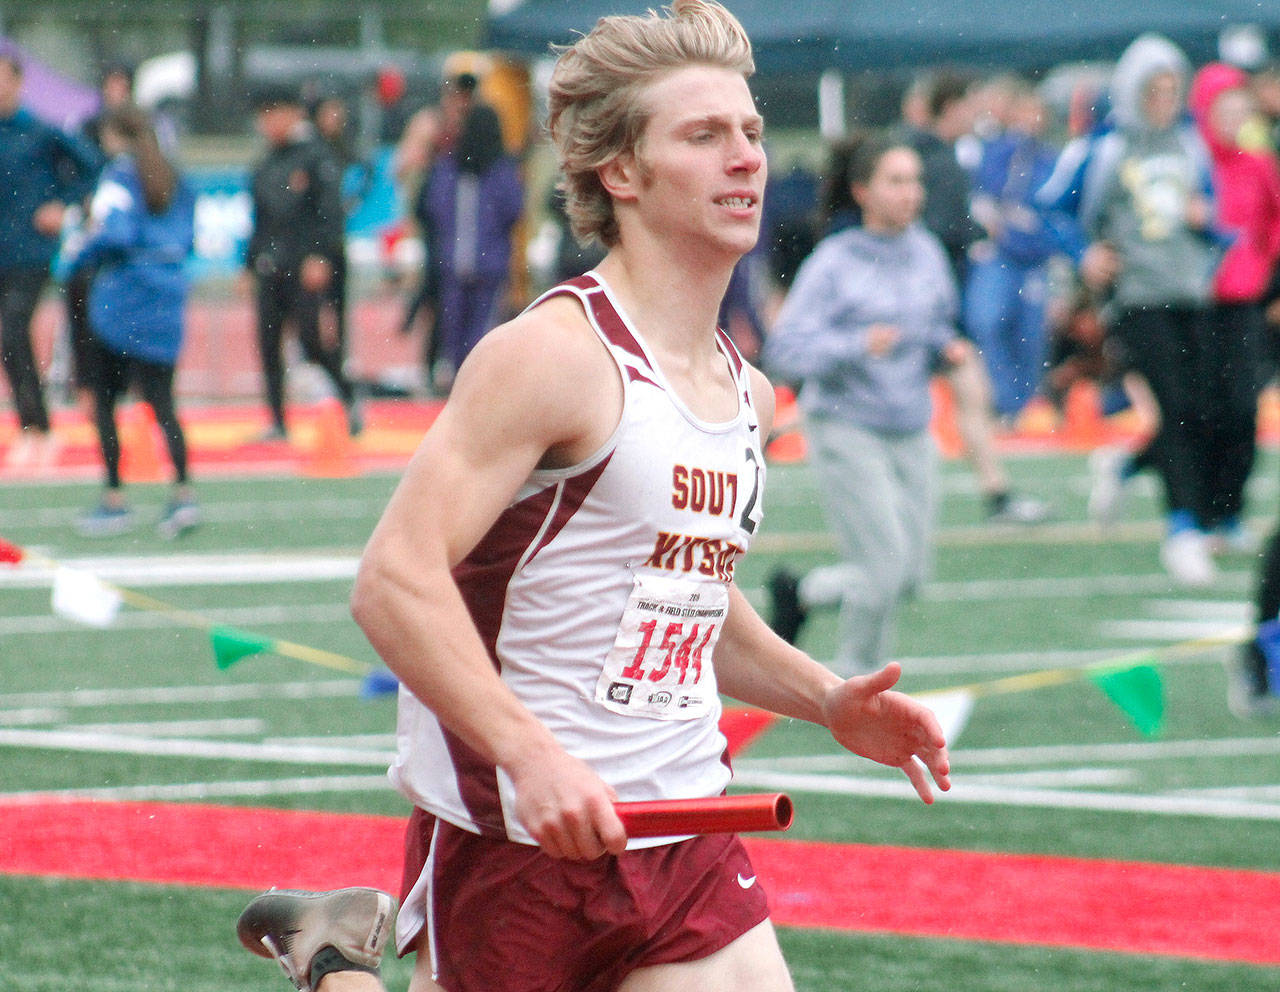 South Kitsap’s Ryan Thoma ran on the third place 4x400 relay team and also placed in the pole vault and long jump. (Mark Krulish/Kitsap News Group)